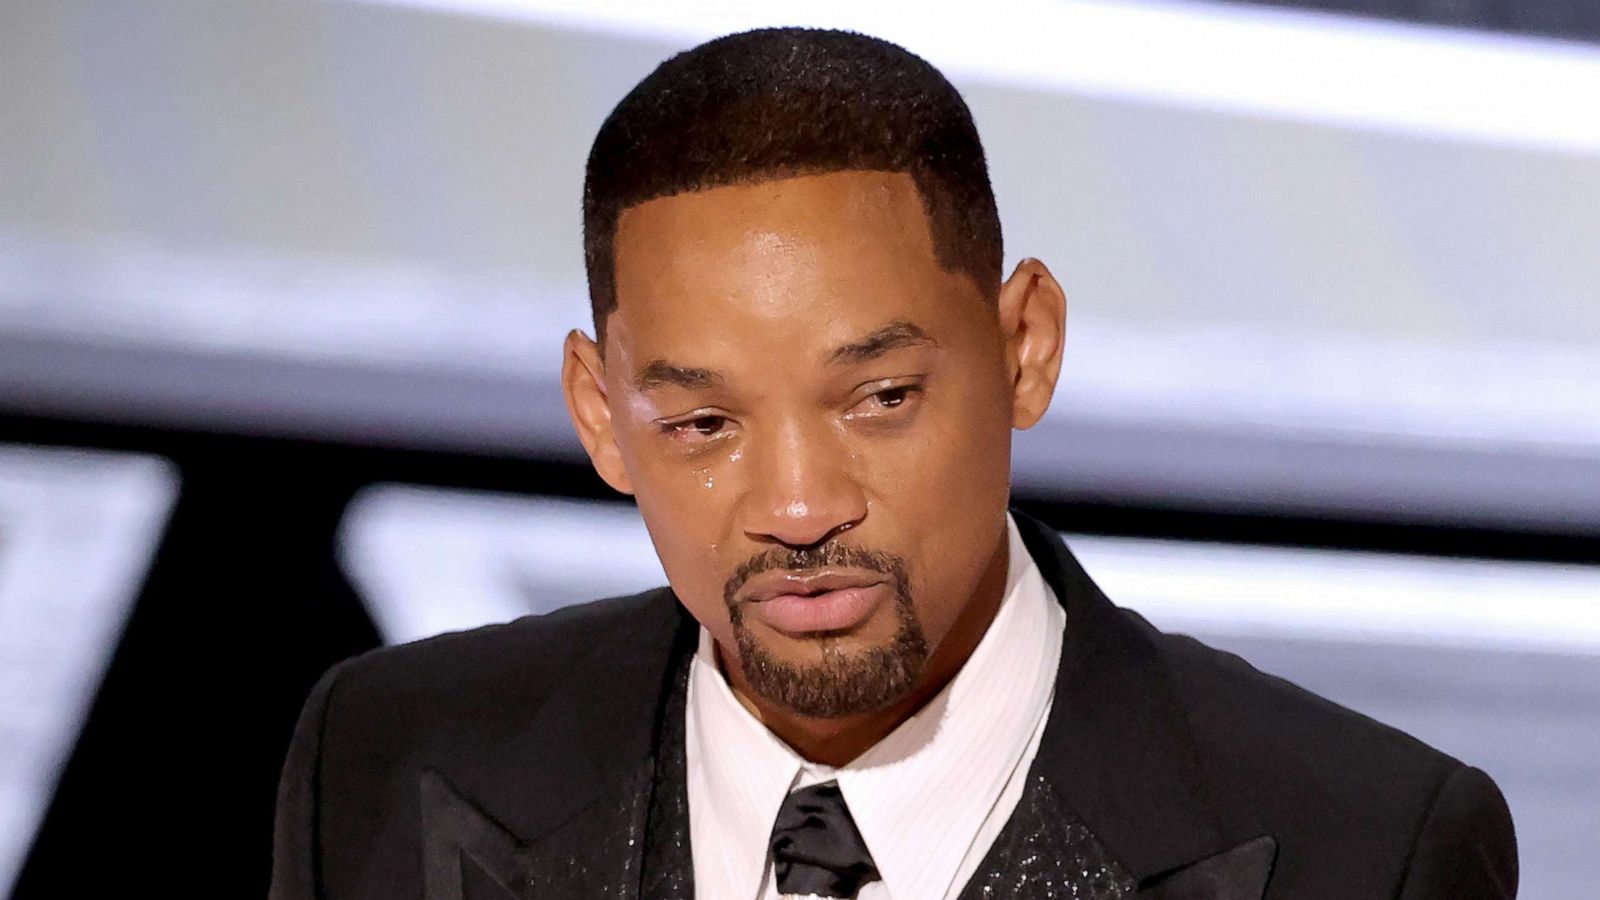 Chris Rock joked that he’got hearing back when Will Smith slapped him